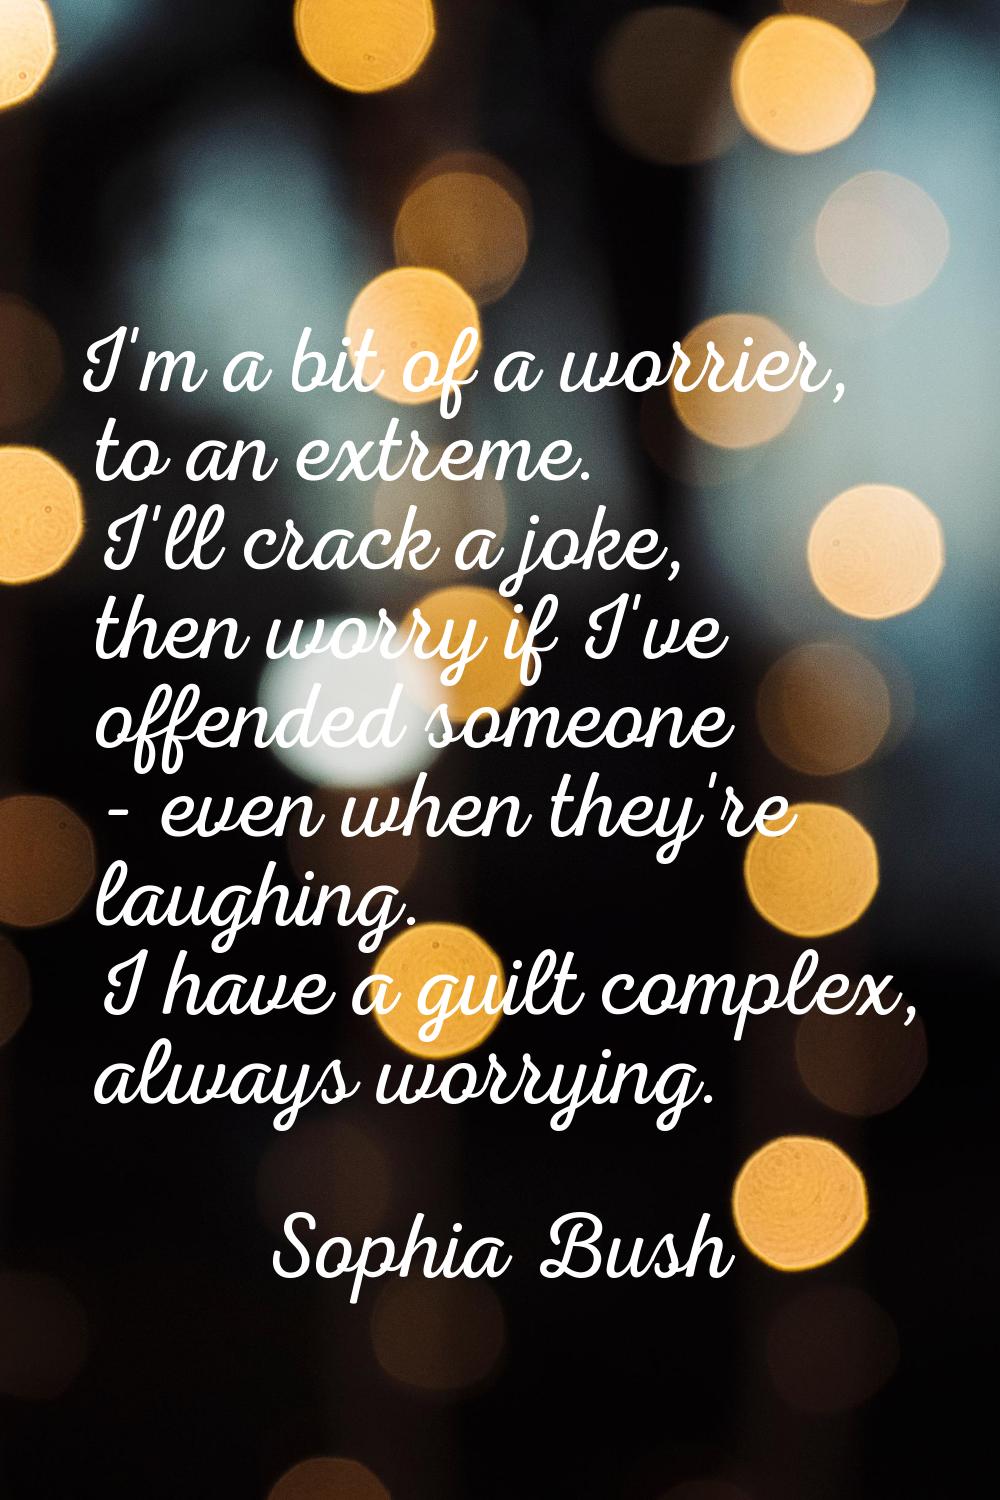 I'm a bit of a worrier, to an extreme. I'll crack a joke, then worry if I've offended someone - eve